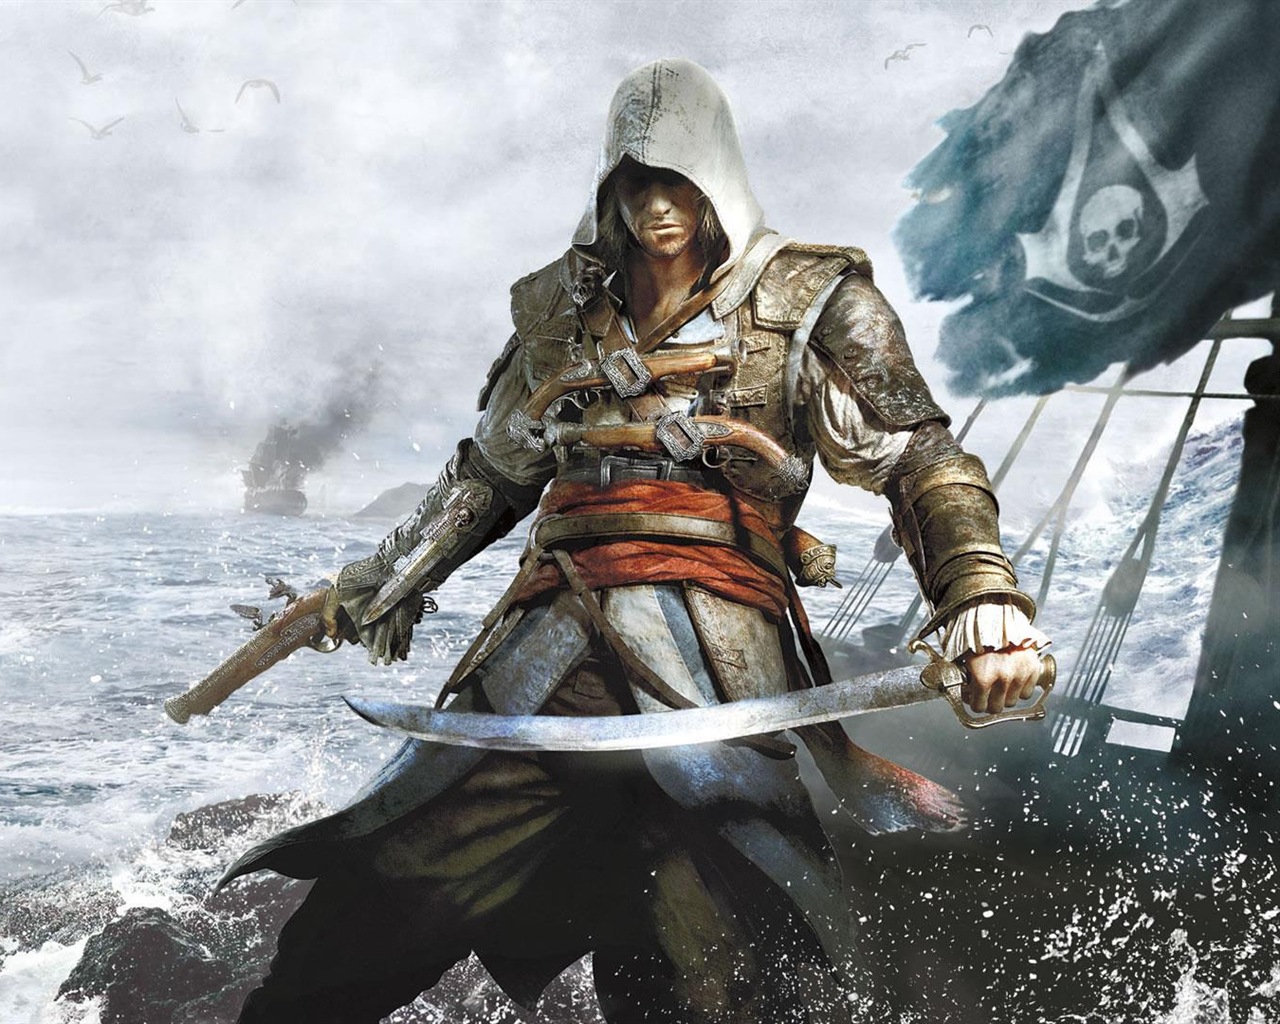 Creed IV Assassin: Black Flag HD wallpapers #7 - 1280x1024